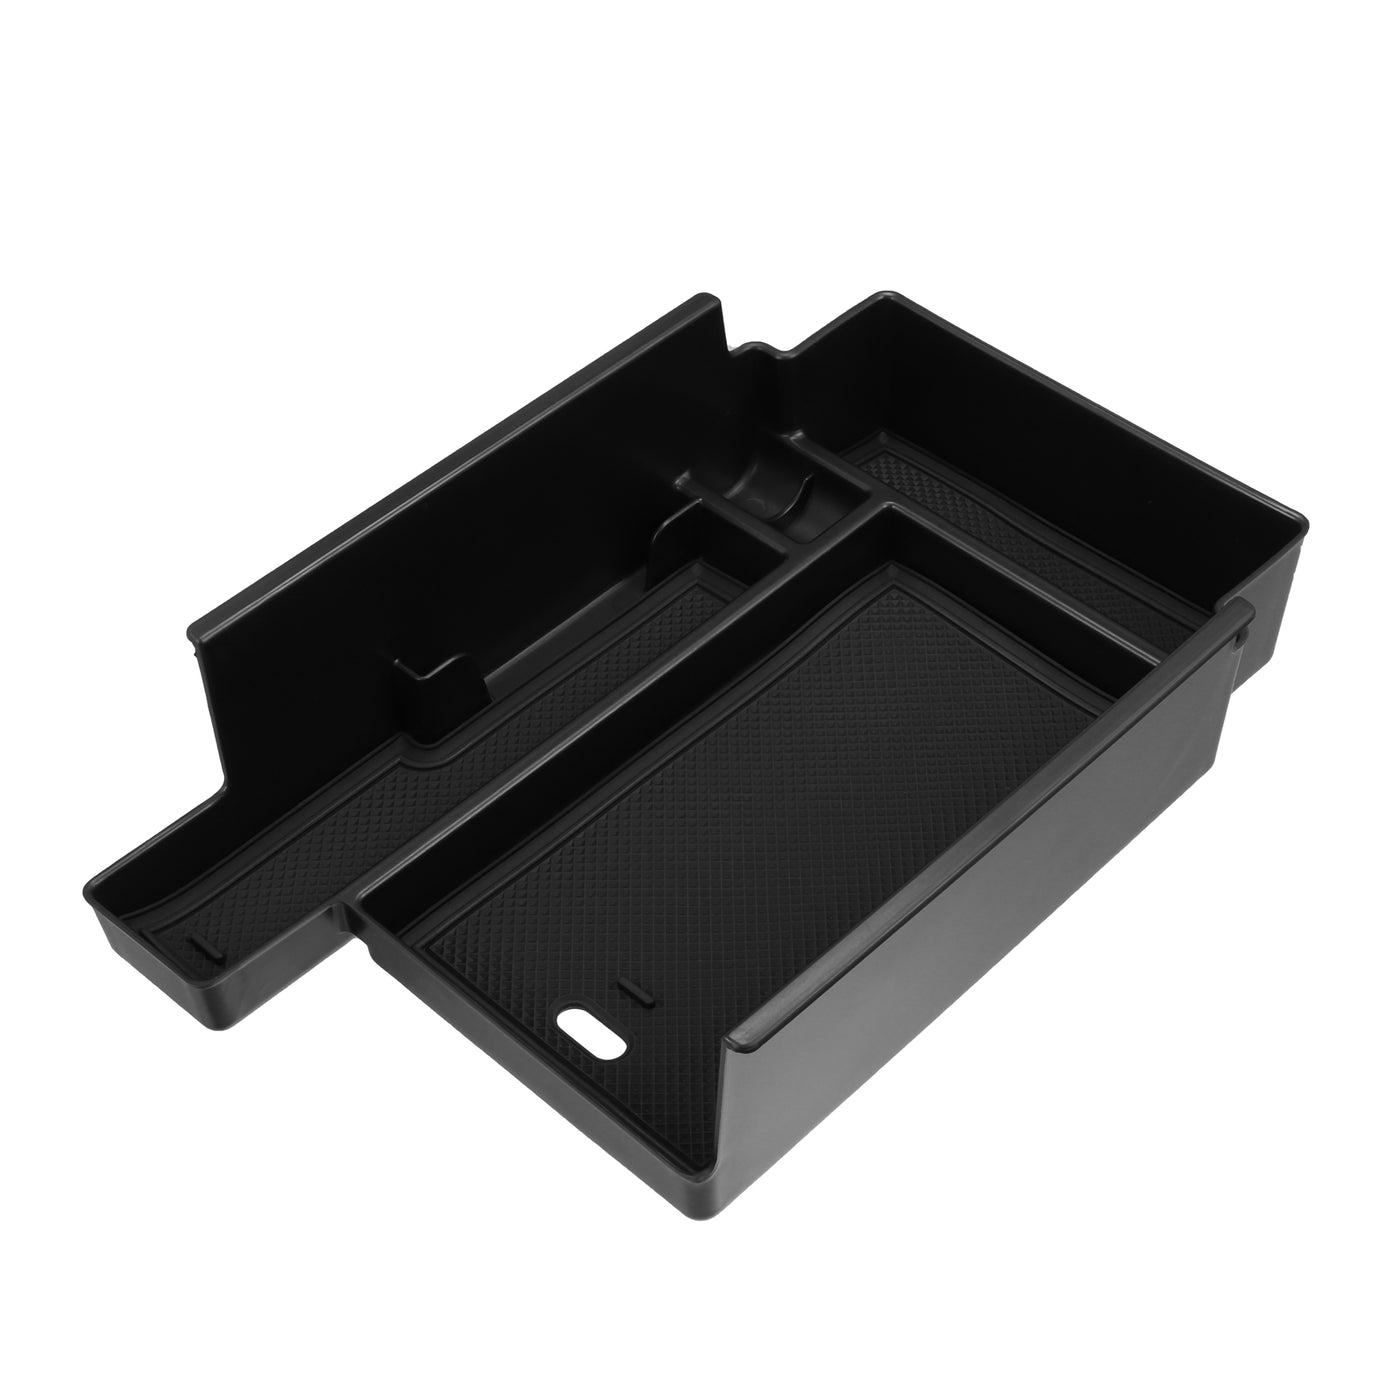 ACROPIX Front Center Console Organizer Tray Fit for Nissan Pathfinder  - Pack of 1 Black